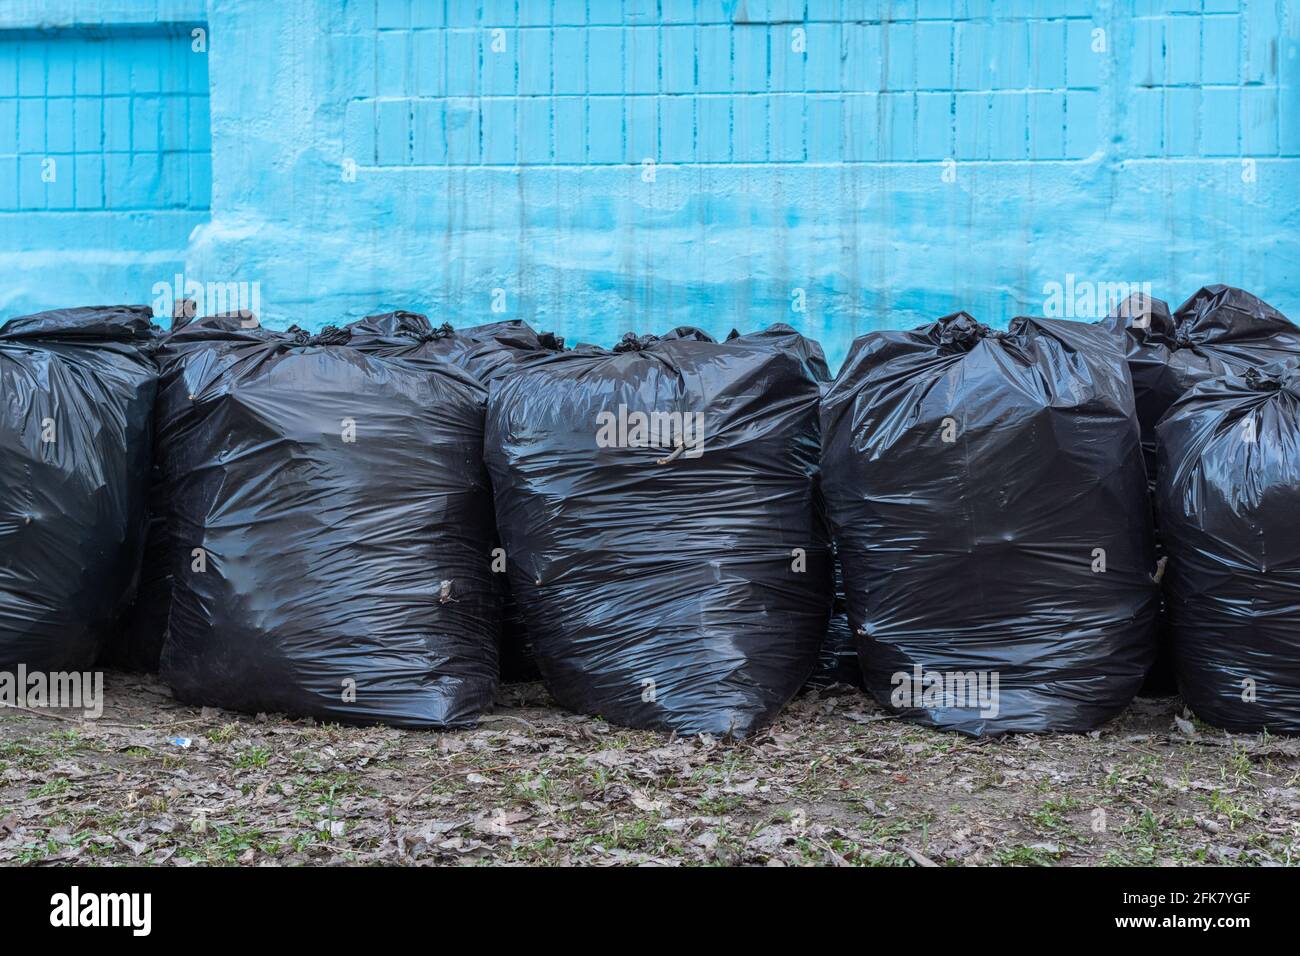 Plastic Garbage Bags Hanging on the Tree, Plastic Waste Pollution Stock  Photo - Image of polyethylene, bags: 198616200